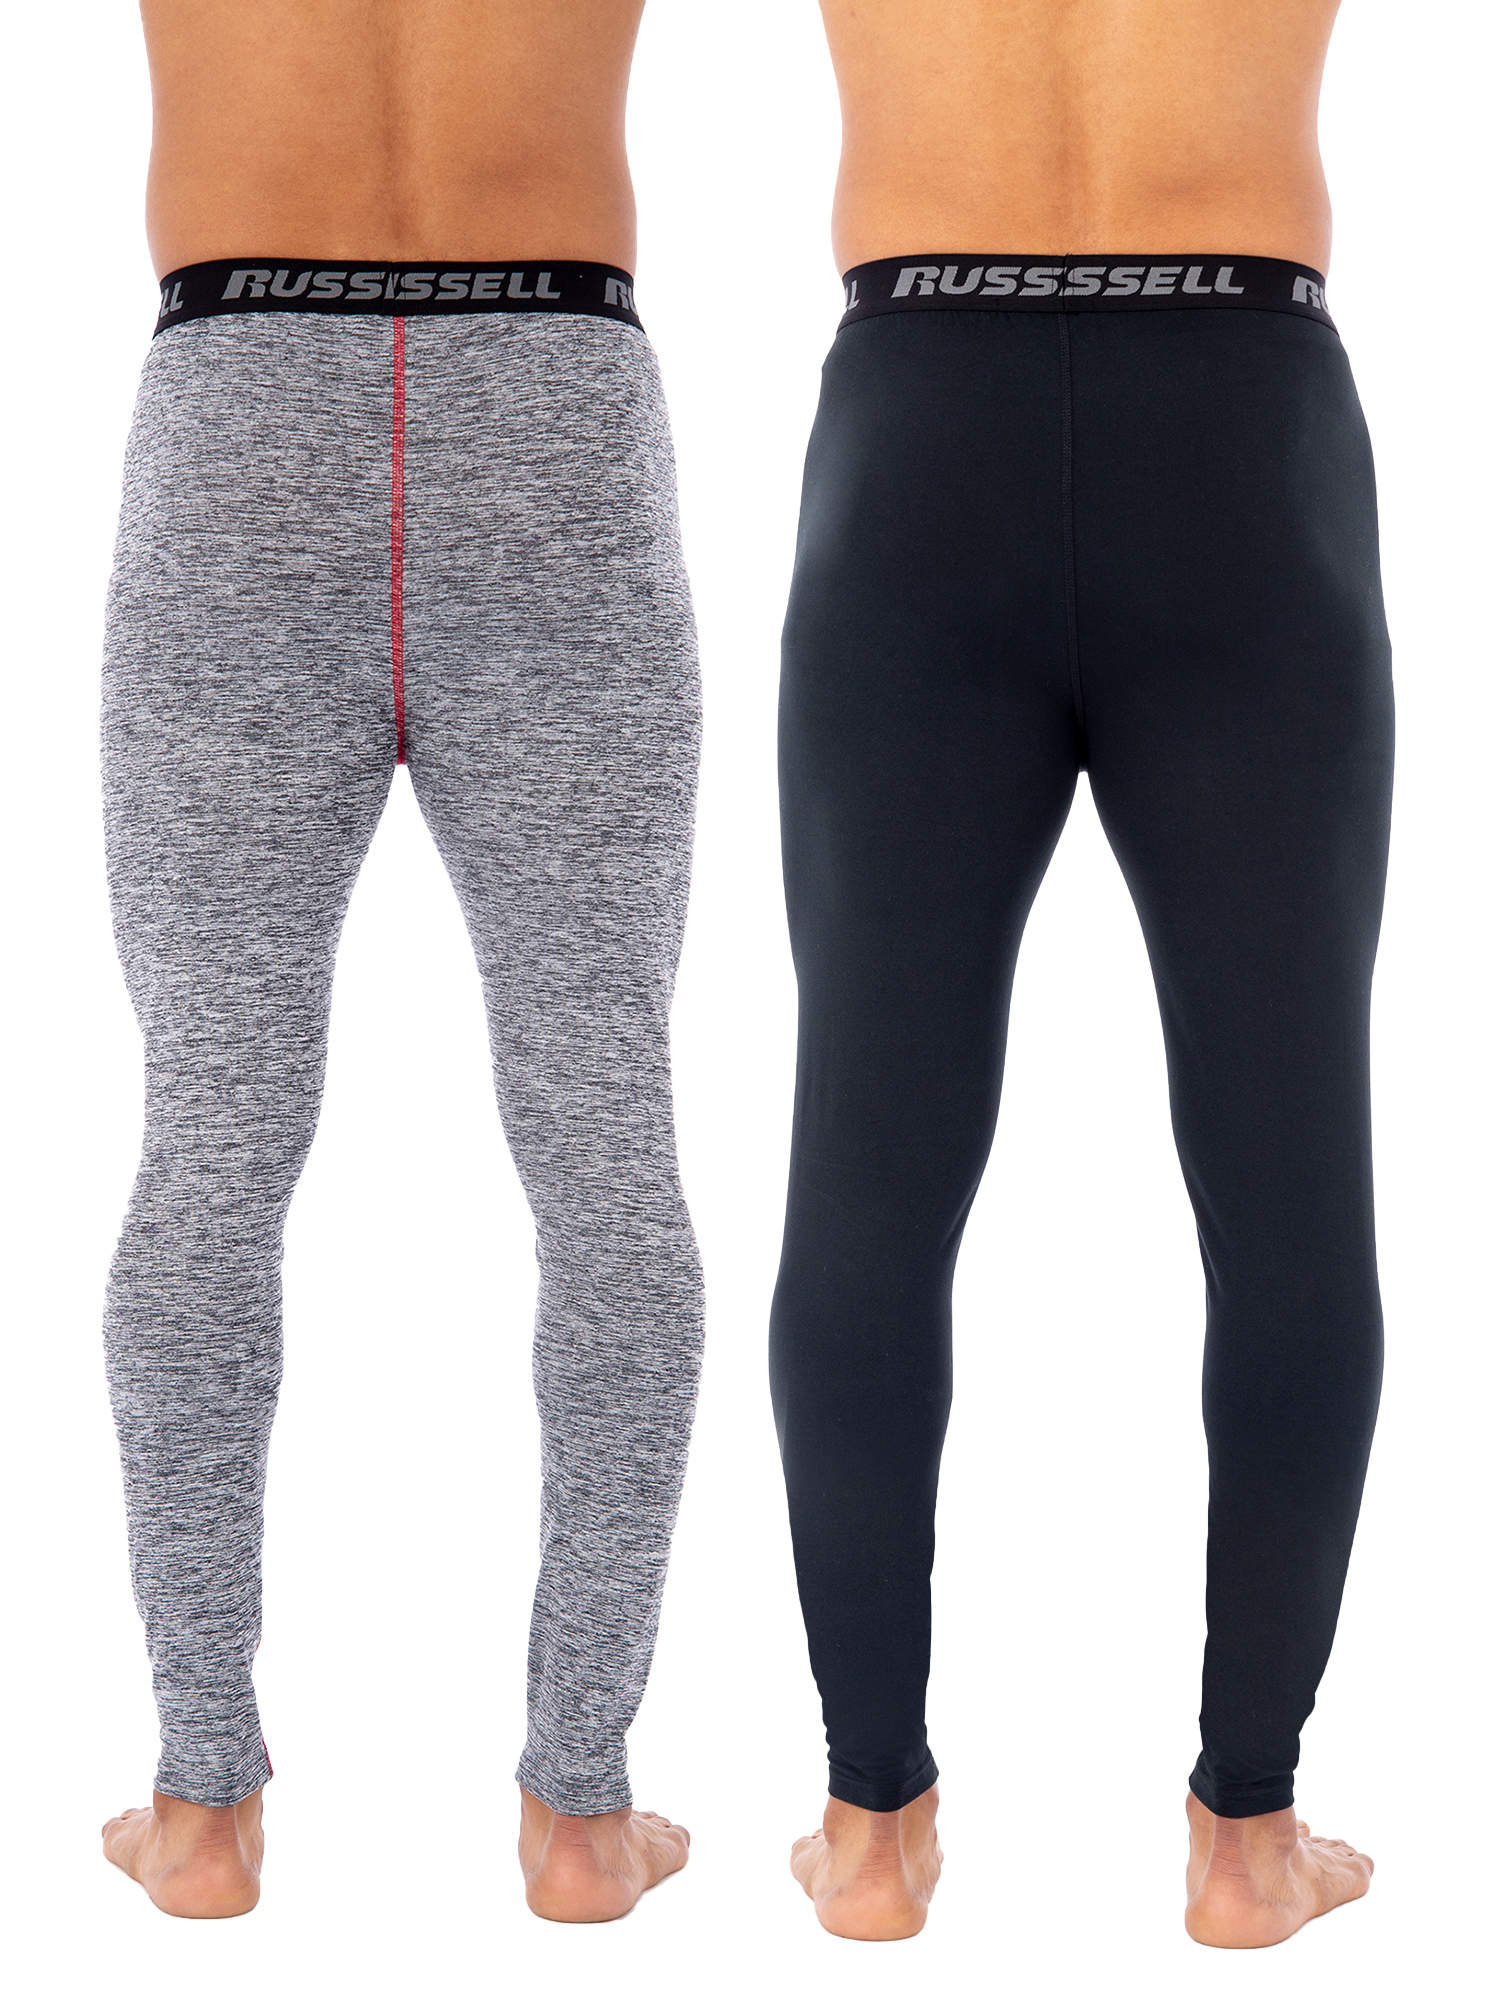 Russell 2-Pack Adult Mens & Big Mens L2 Active Performance Base Layer Thermal Pant, Sizes M-5XL - image 3 of 6